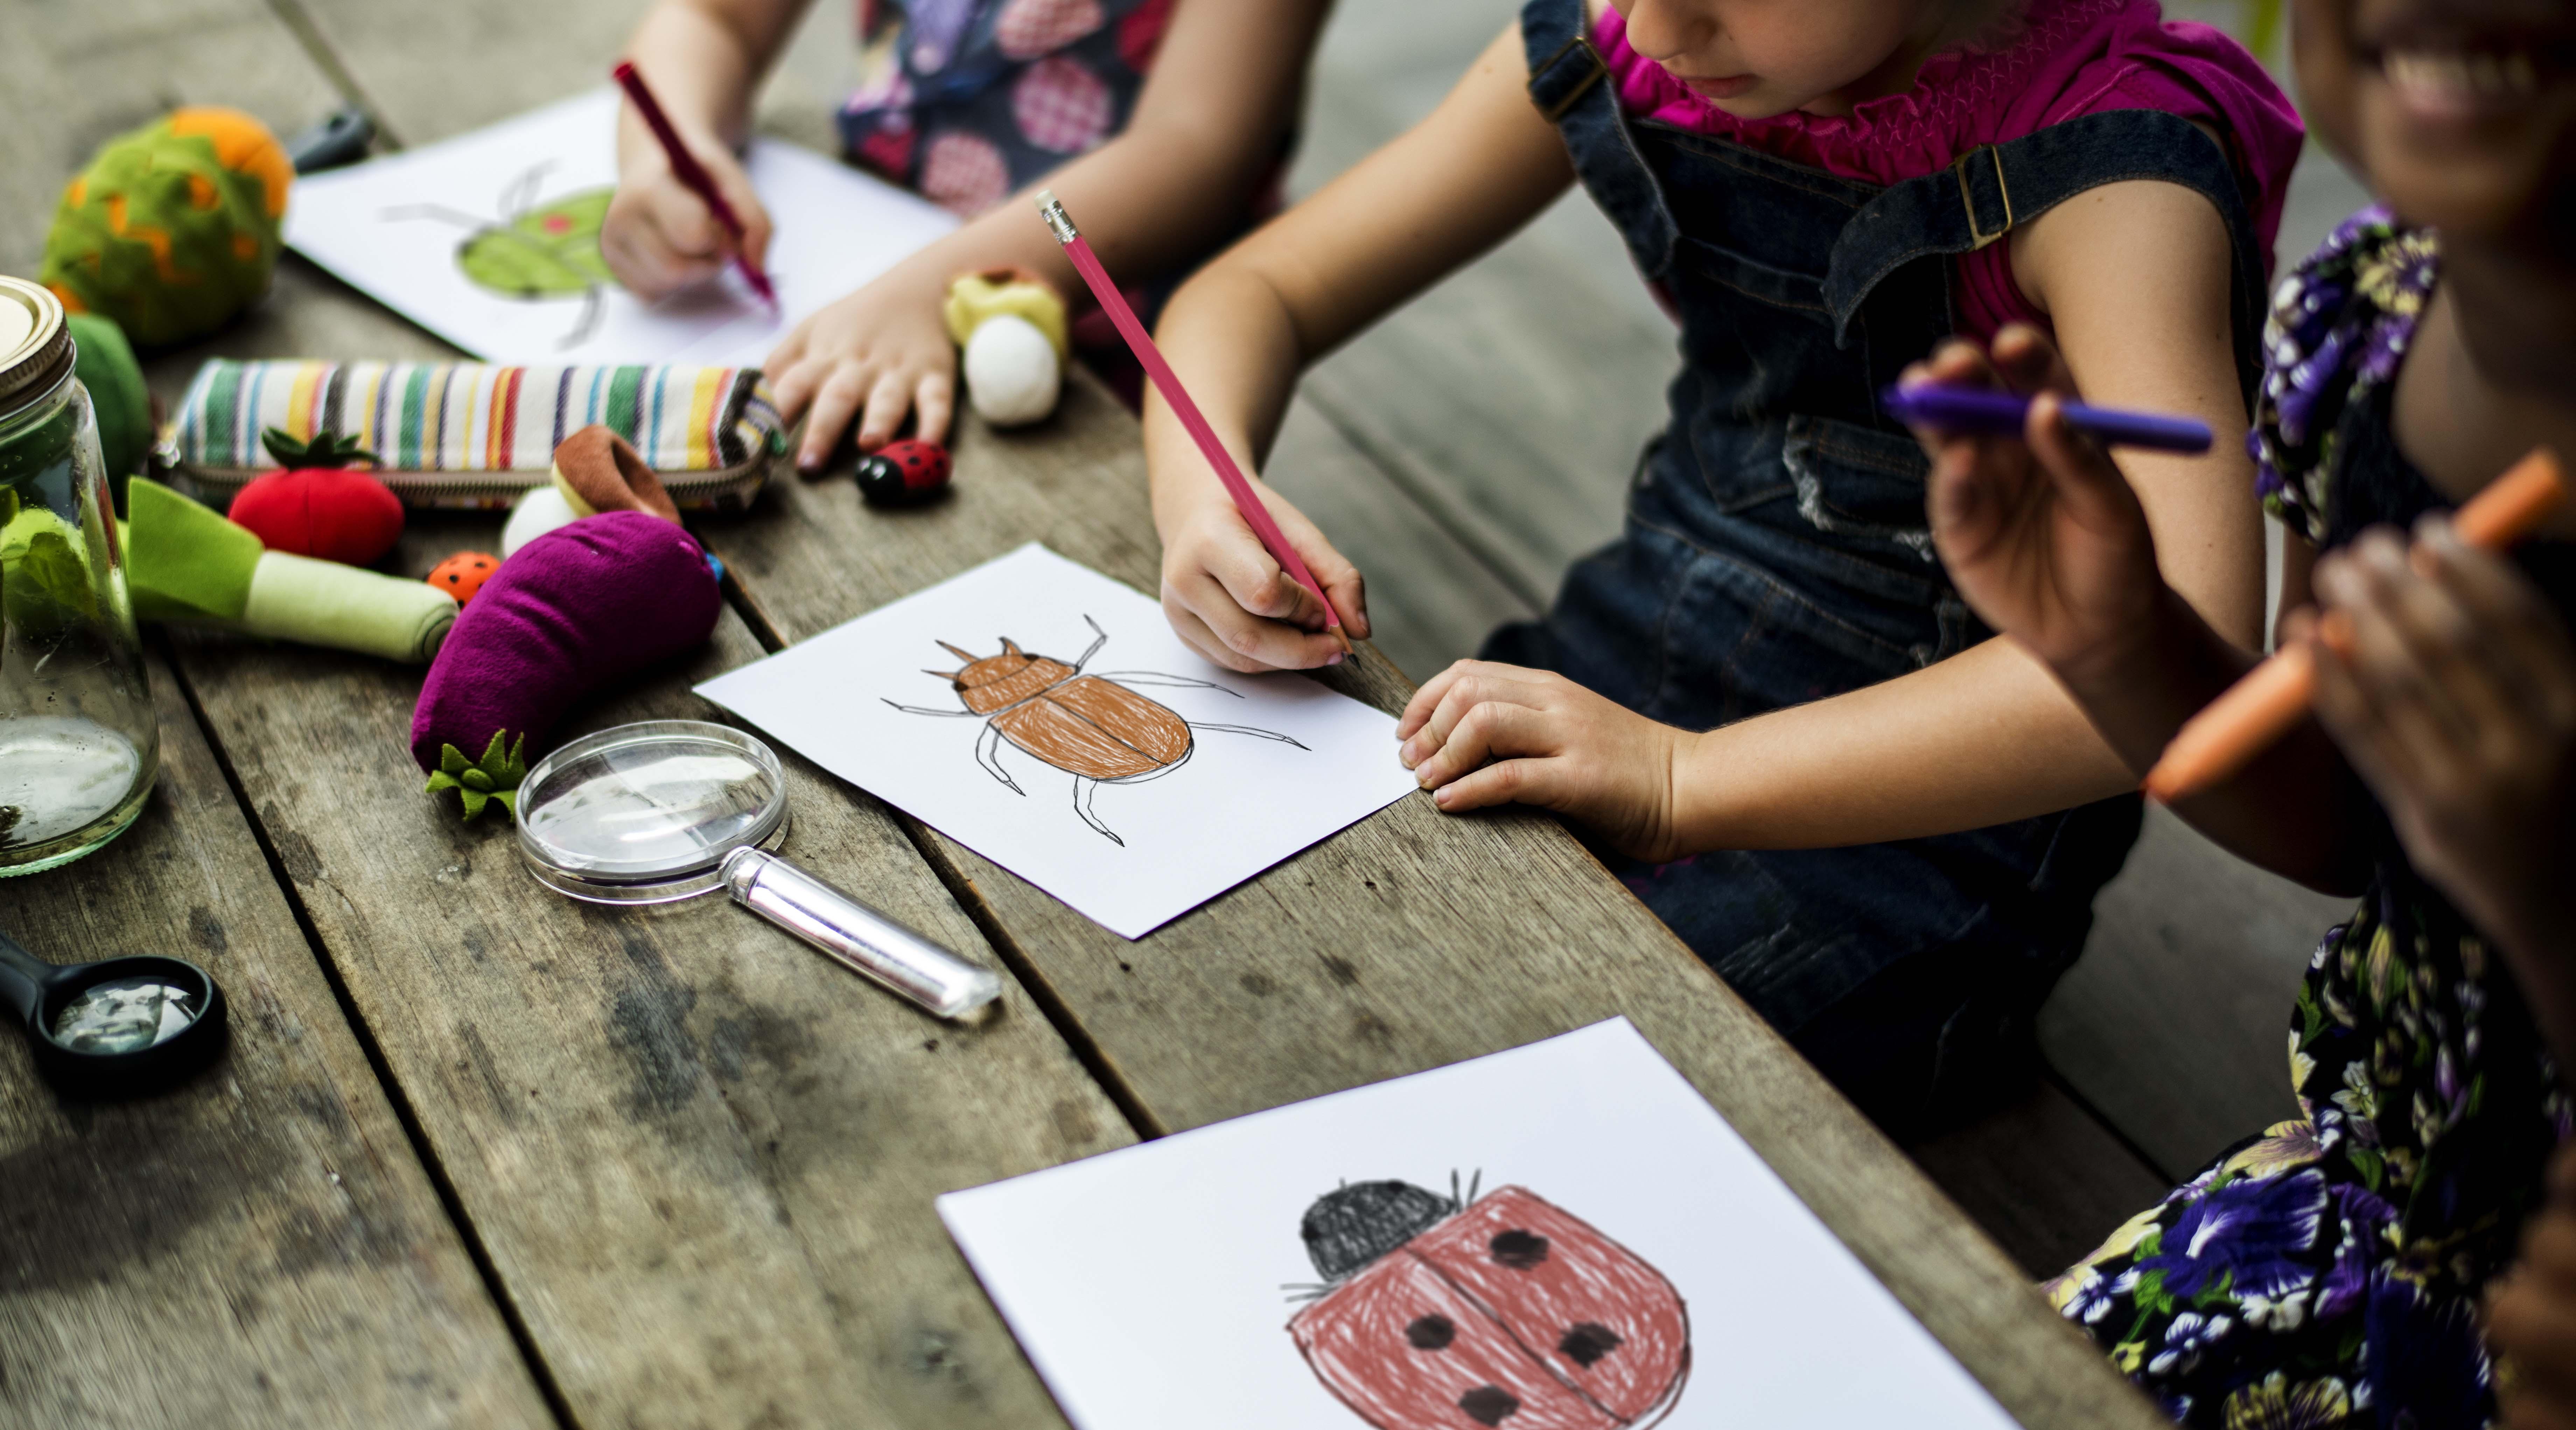 Three children sitting at a wooden table drawing pictures of beetles